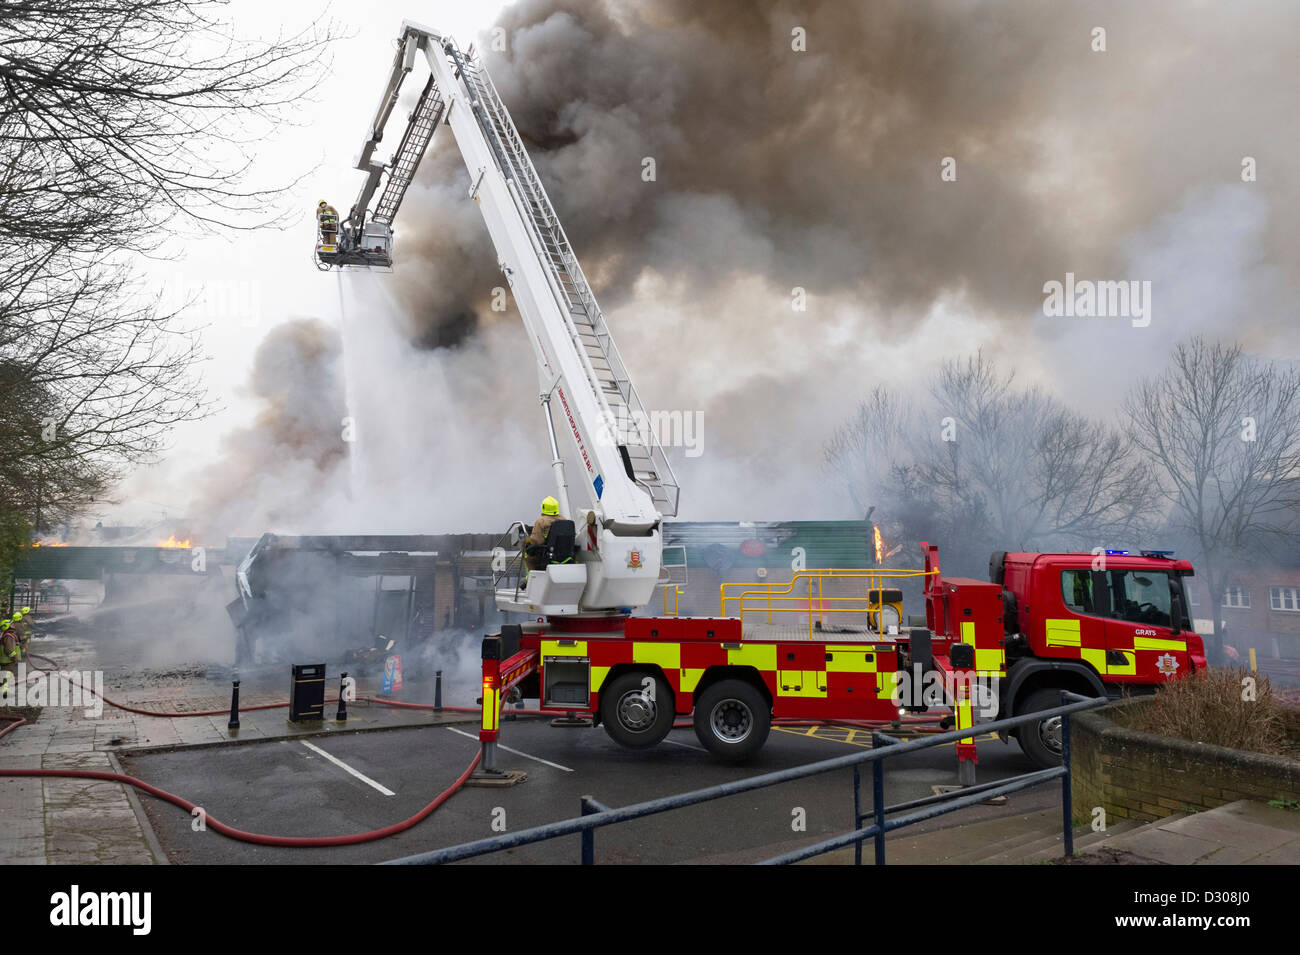 Firefighters on a turntable ladder from a fire engine tackle a blaze in England, UK Stock Photo